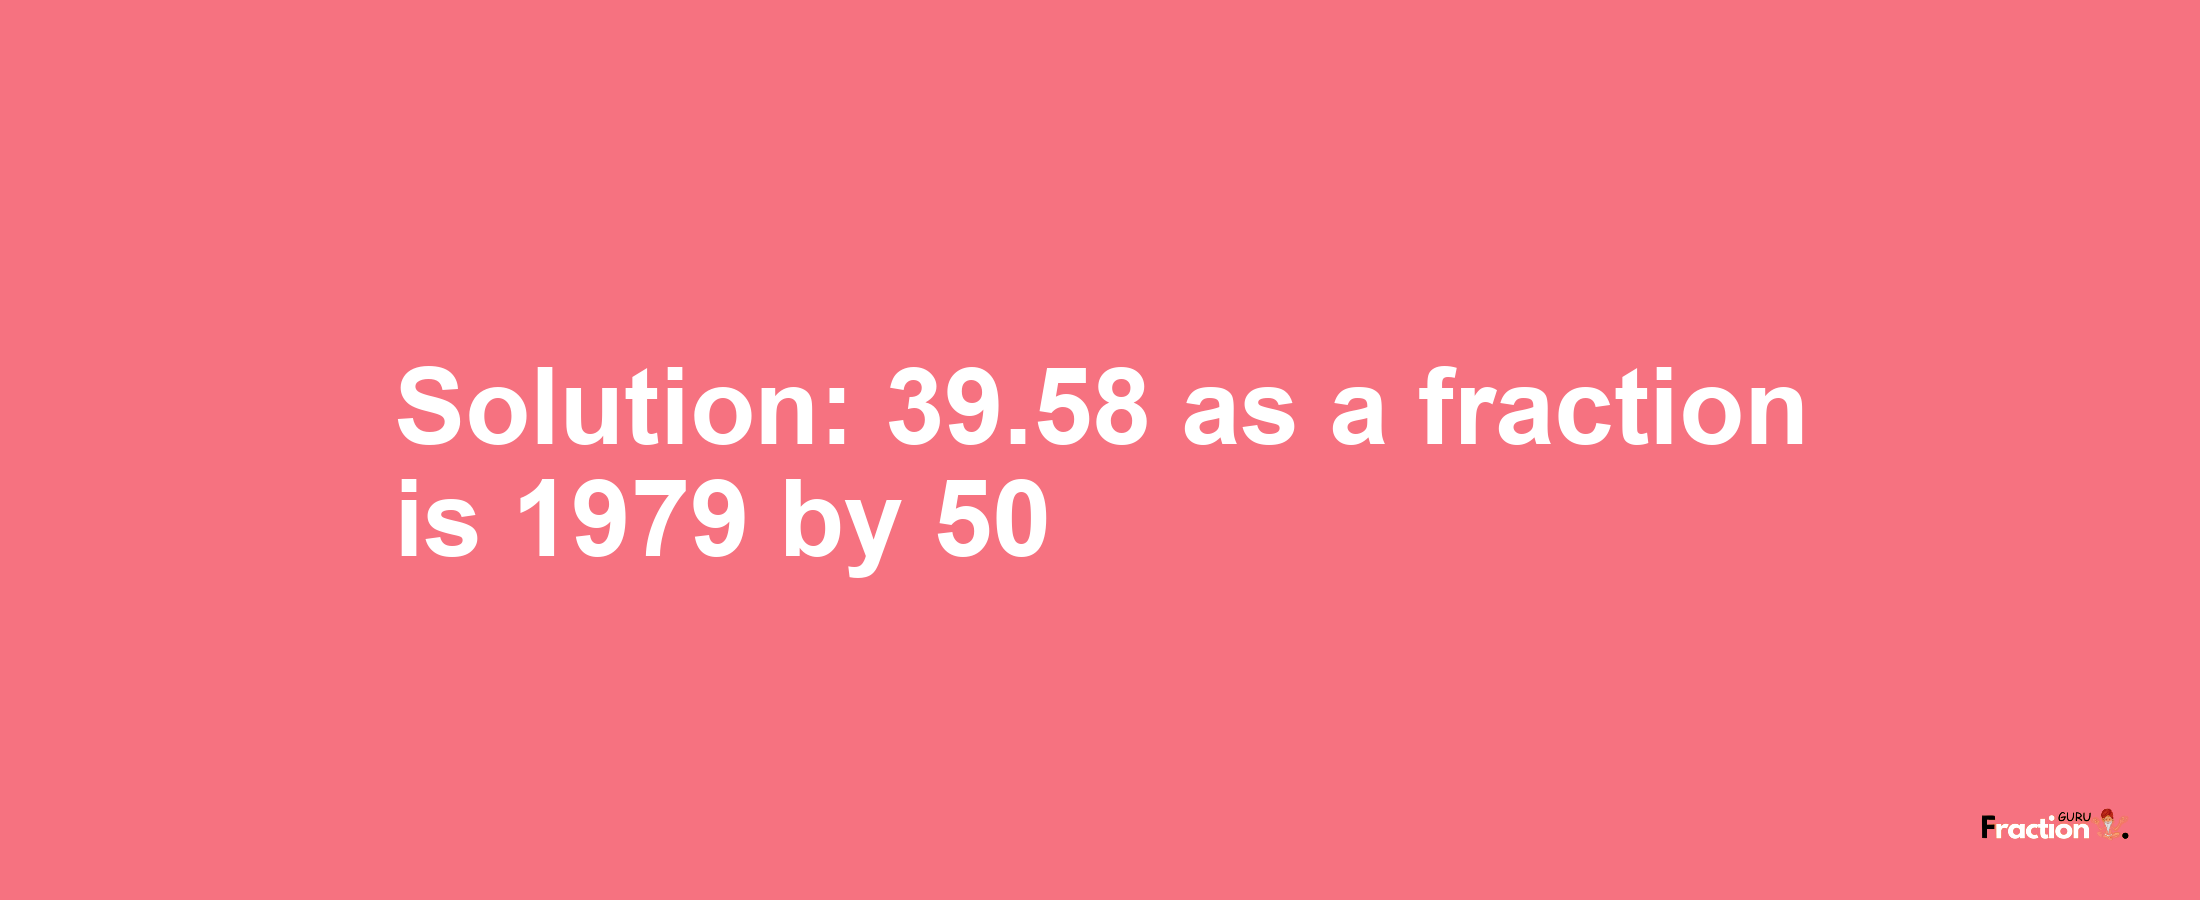 Solution:39.58 as a fraction is 1979/50